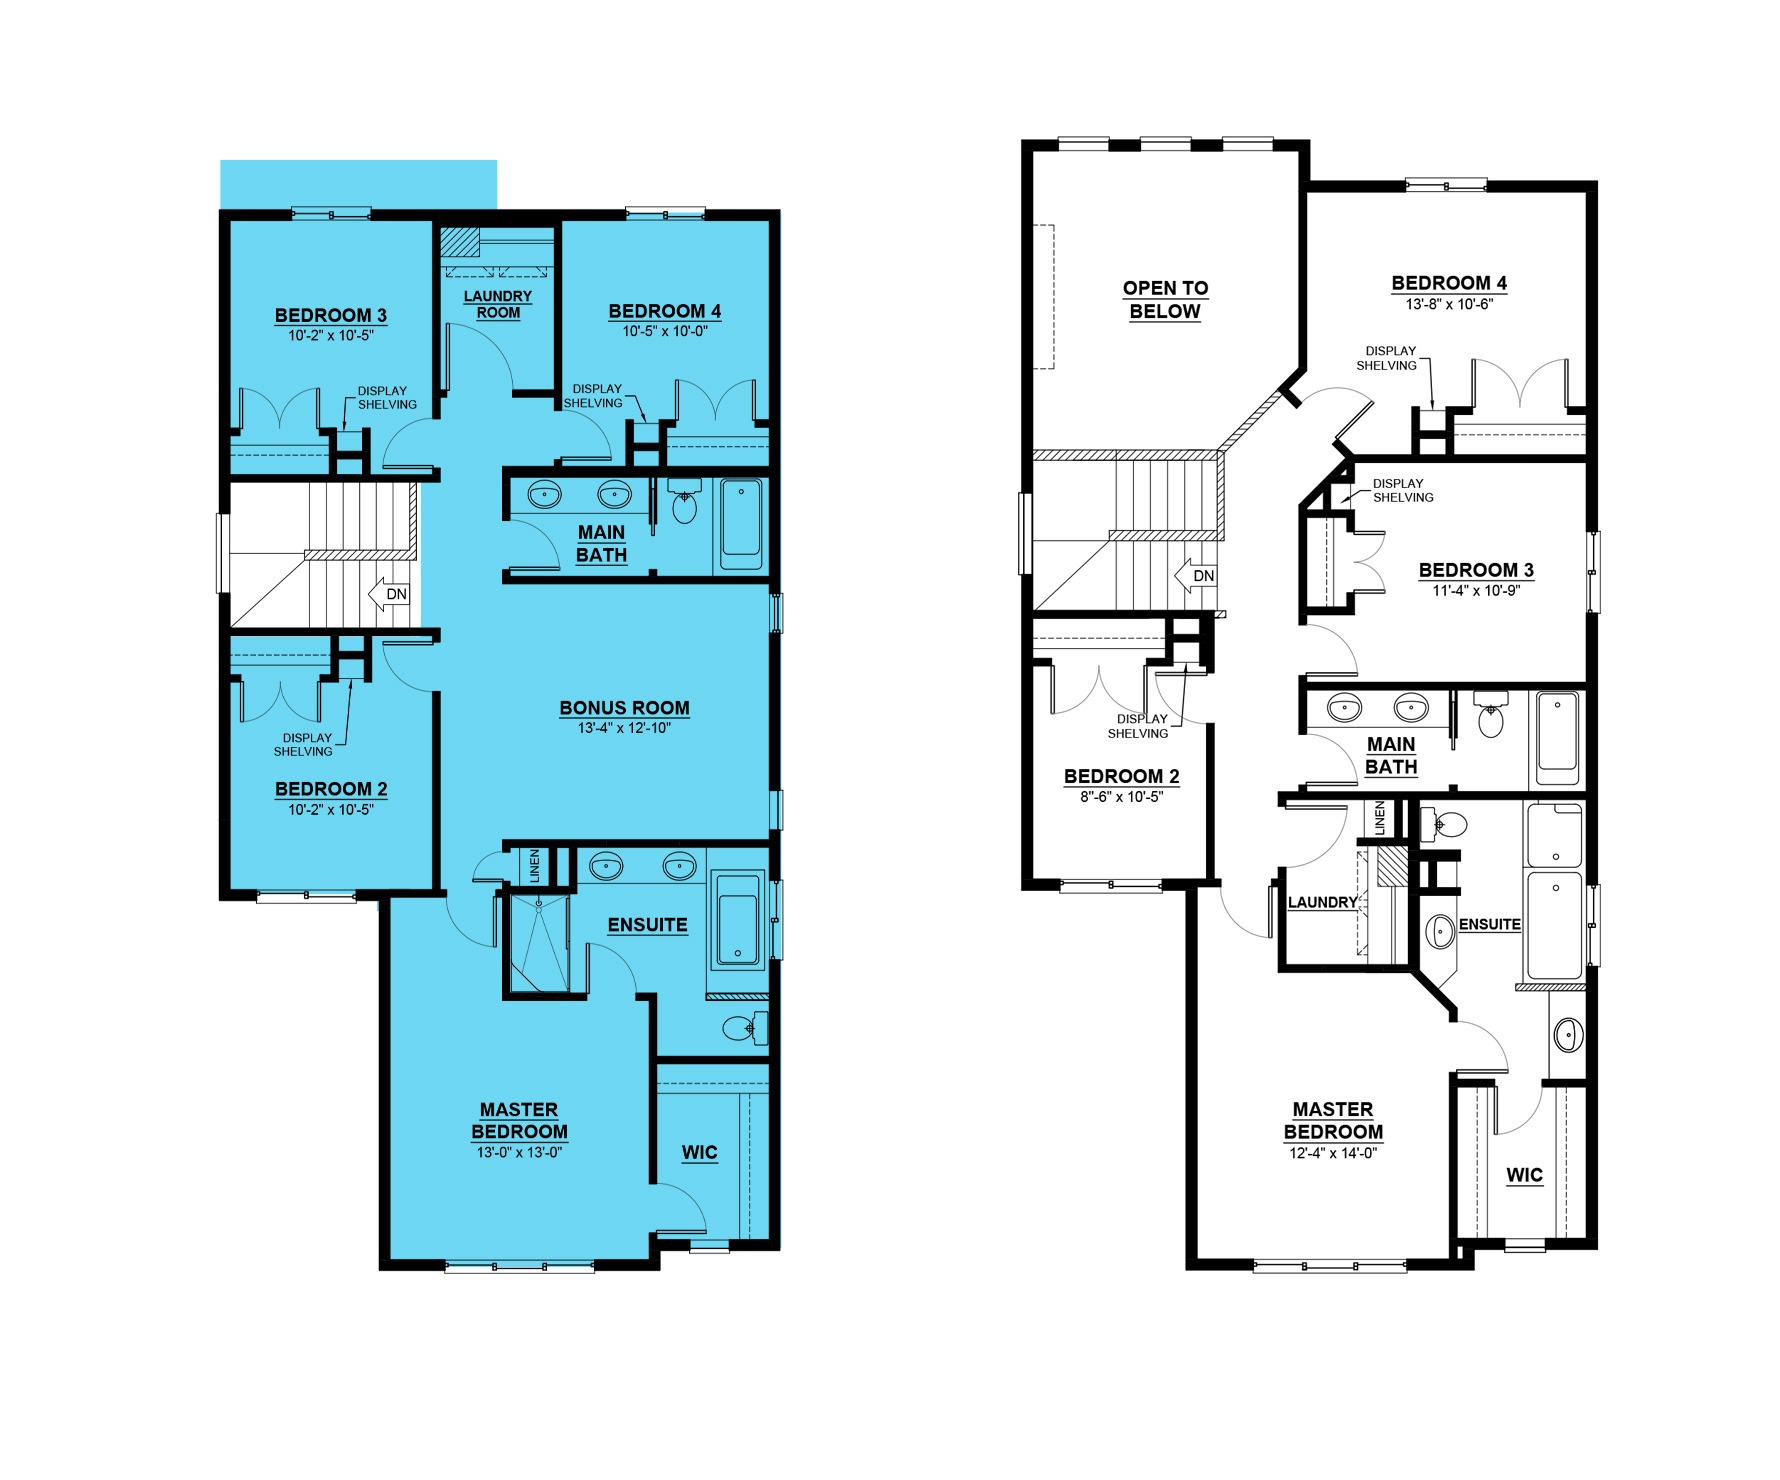 EVEREST Floor Plan of Saxony Glen by Daytona Homes with undefined beds